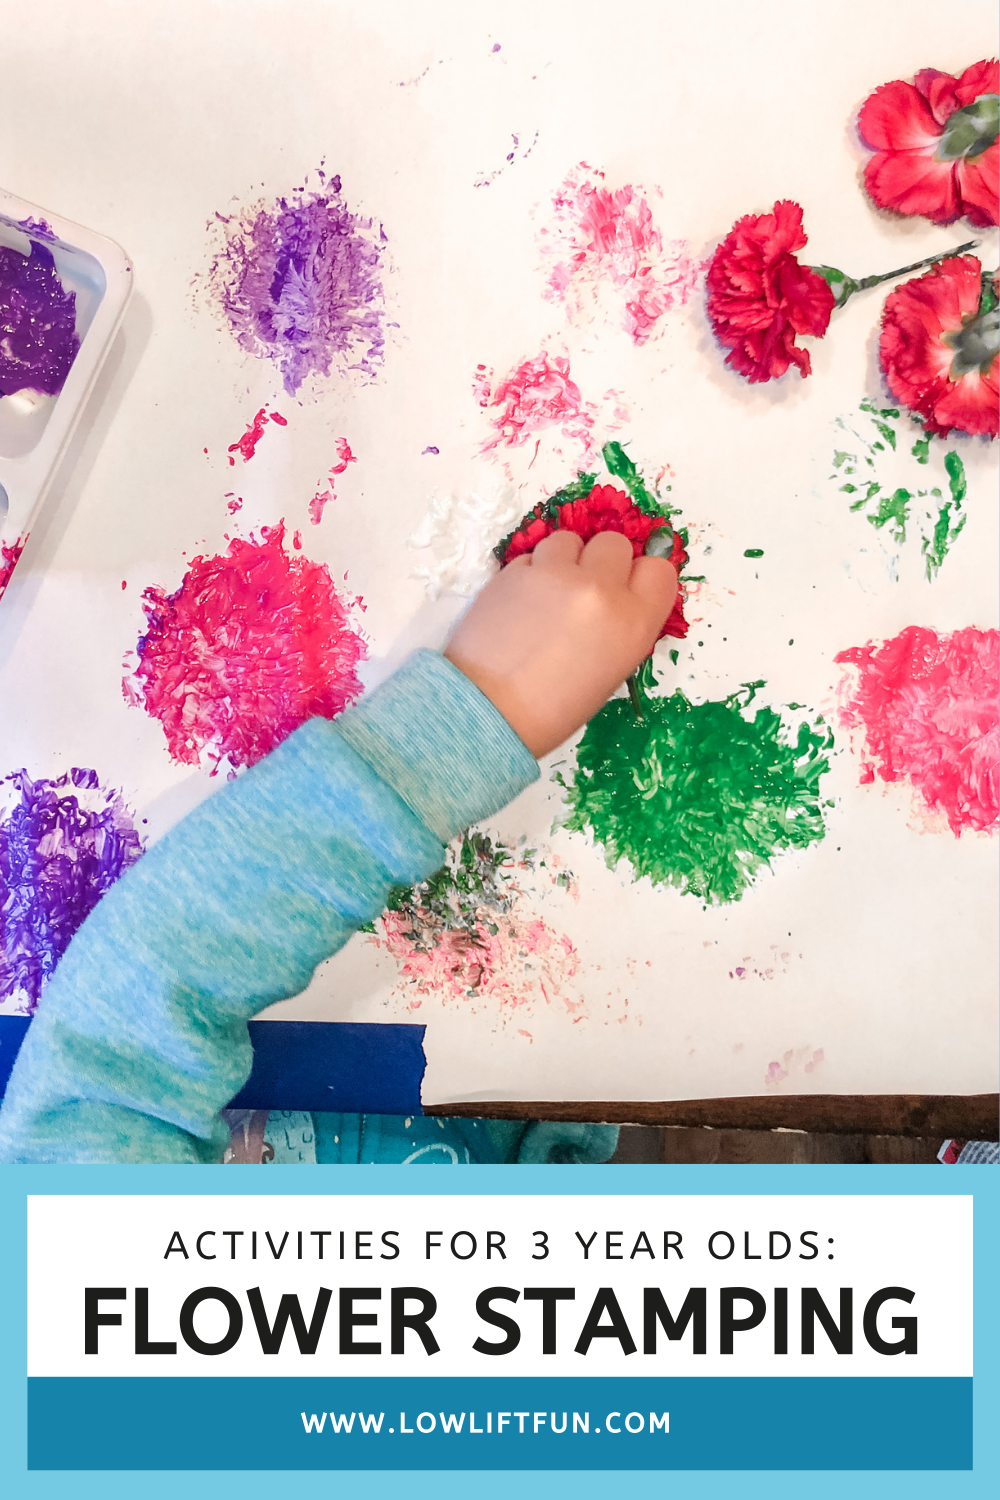 Activities to do with 3 year olds - flower stamping